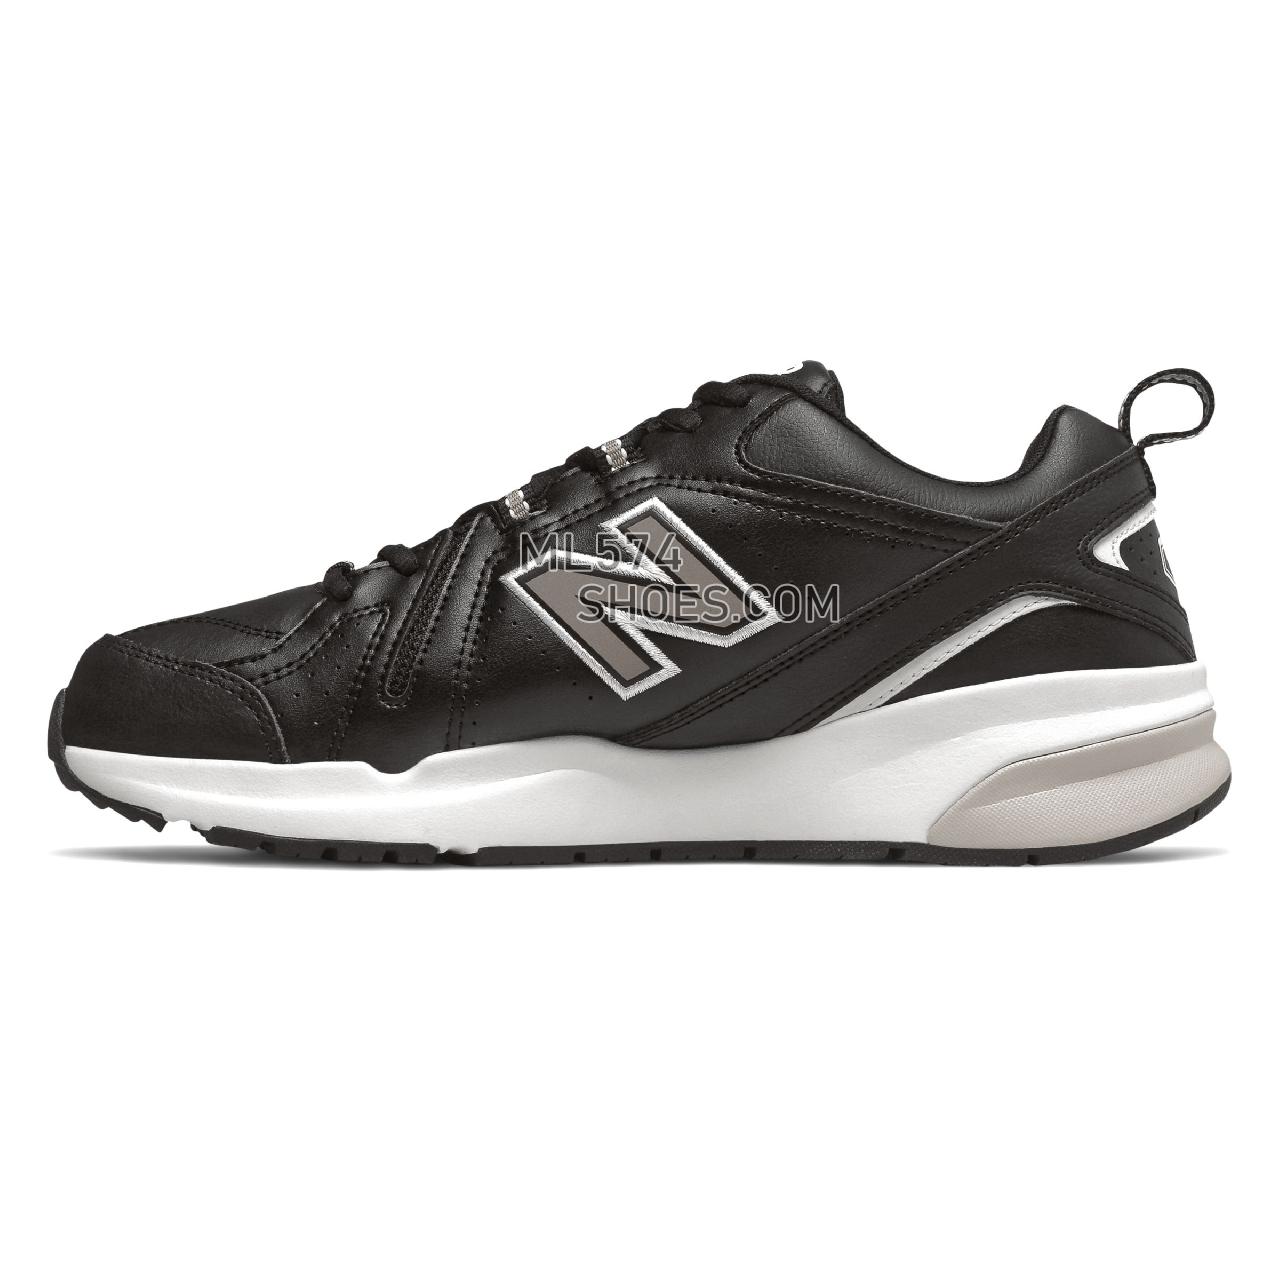 New Balance 608v5 - Men's Everyday Trainers - Black with White - MX608RB5